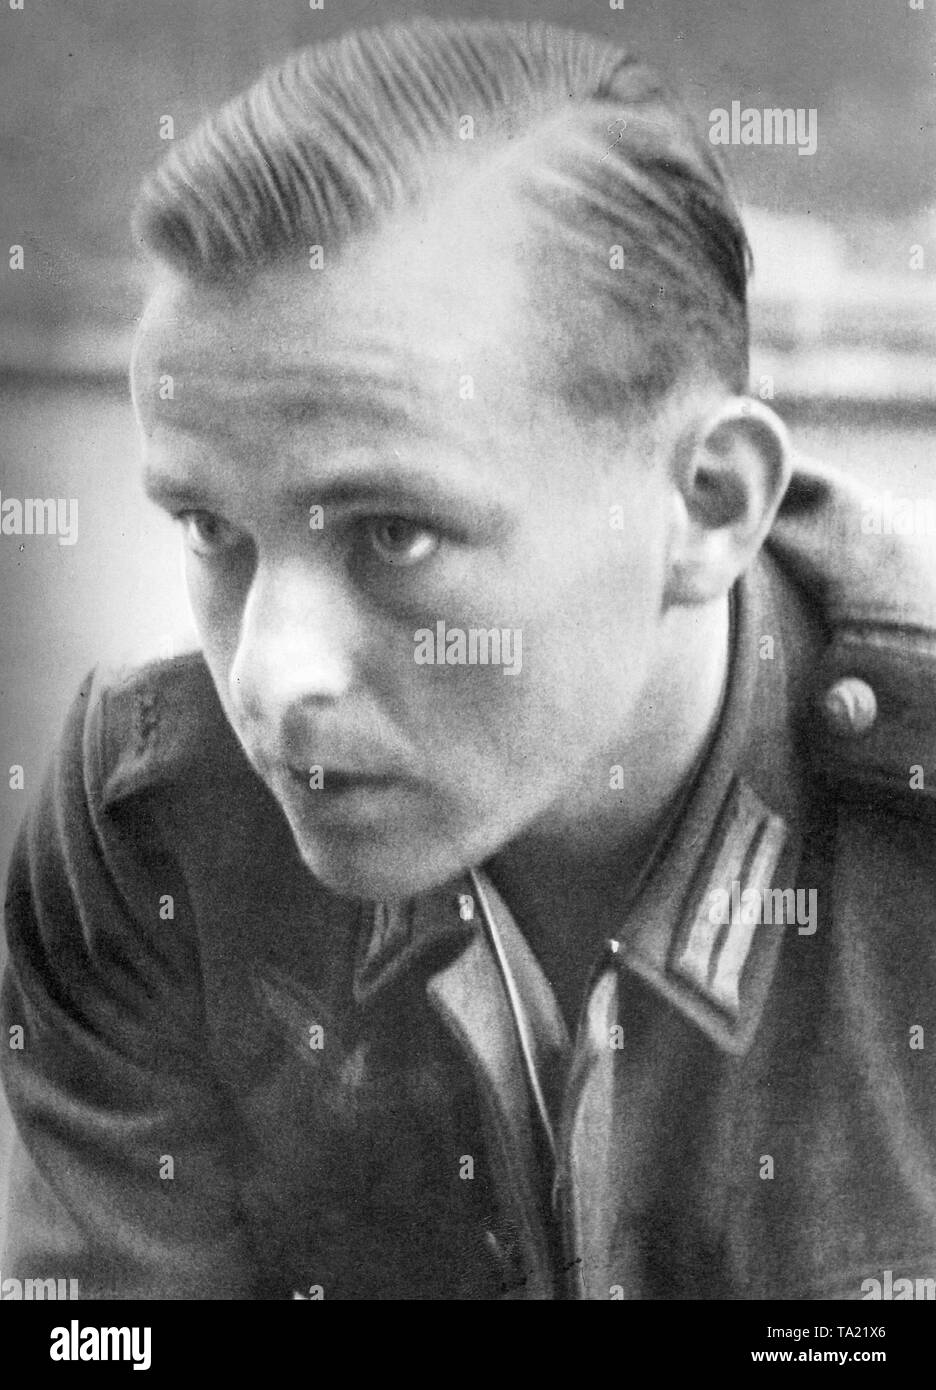 Willi Graf, a member of the resistance organization 'The White Rose' in the Third Reich. Stock Photo